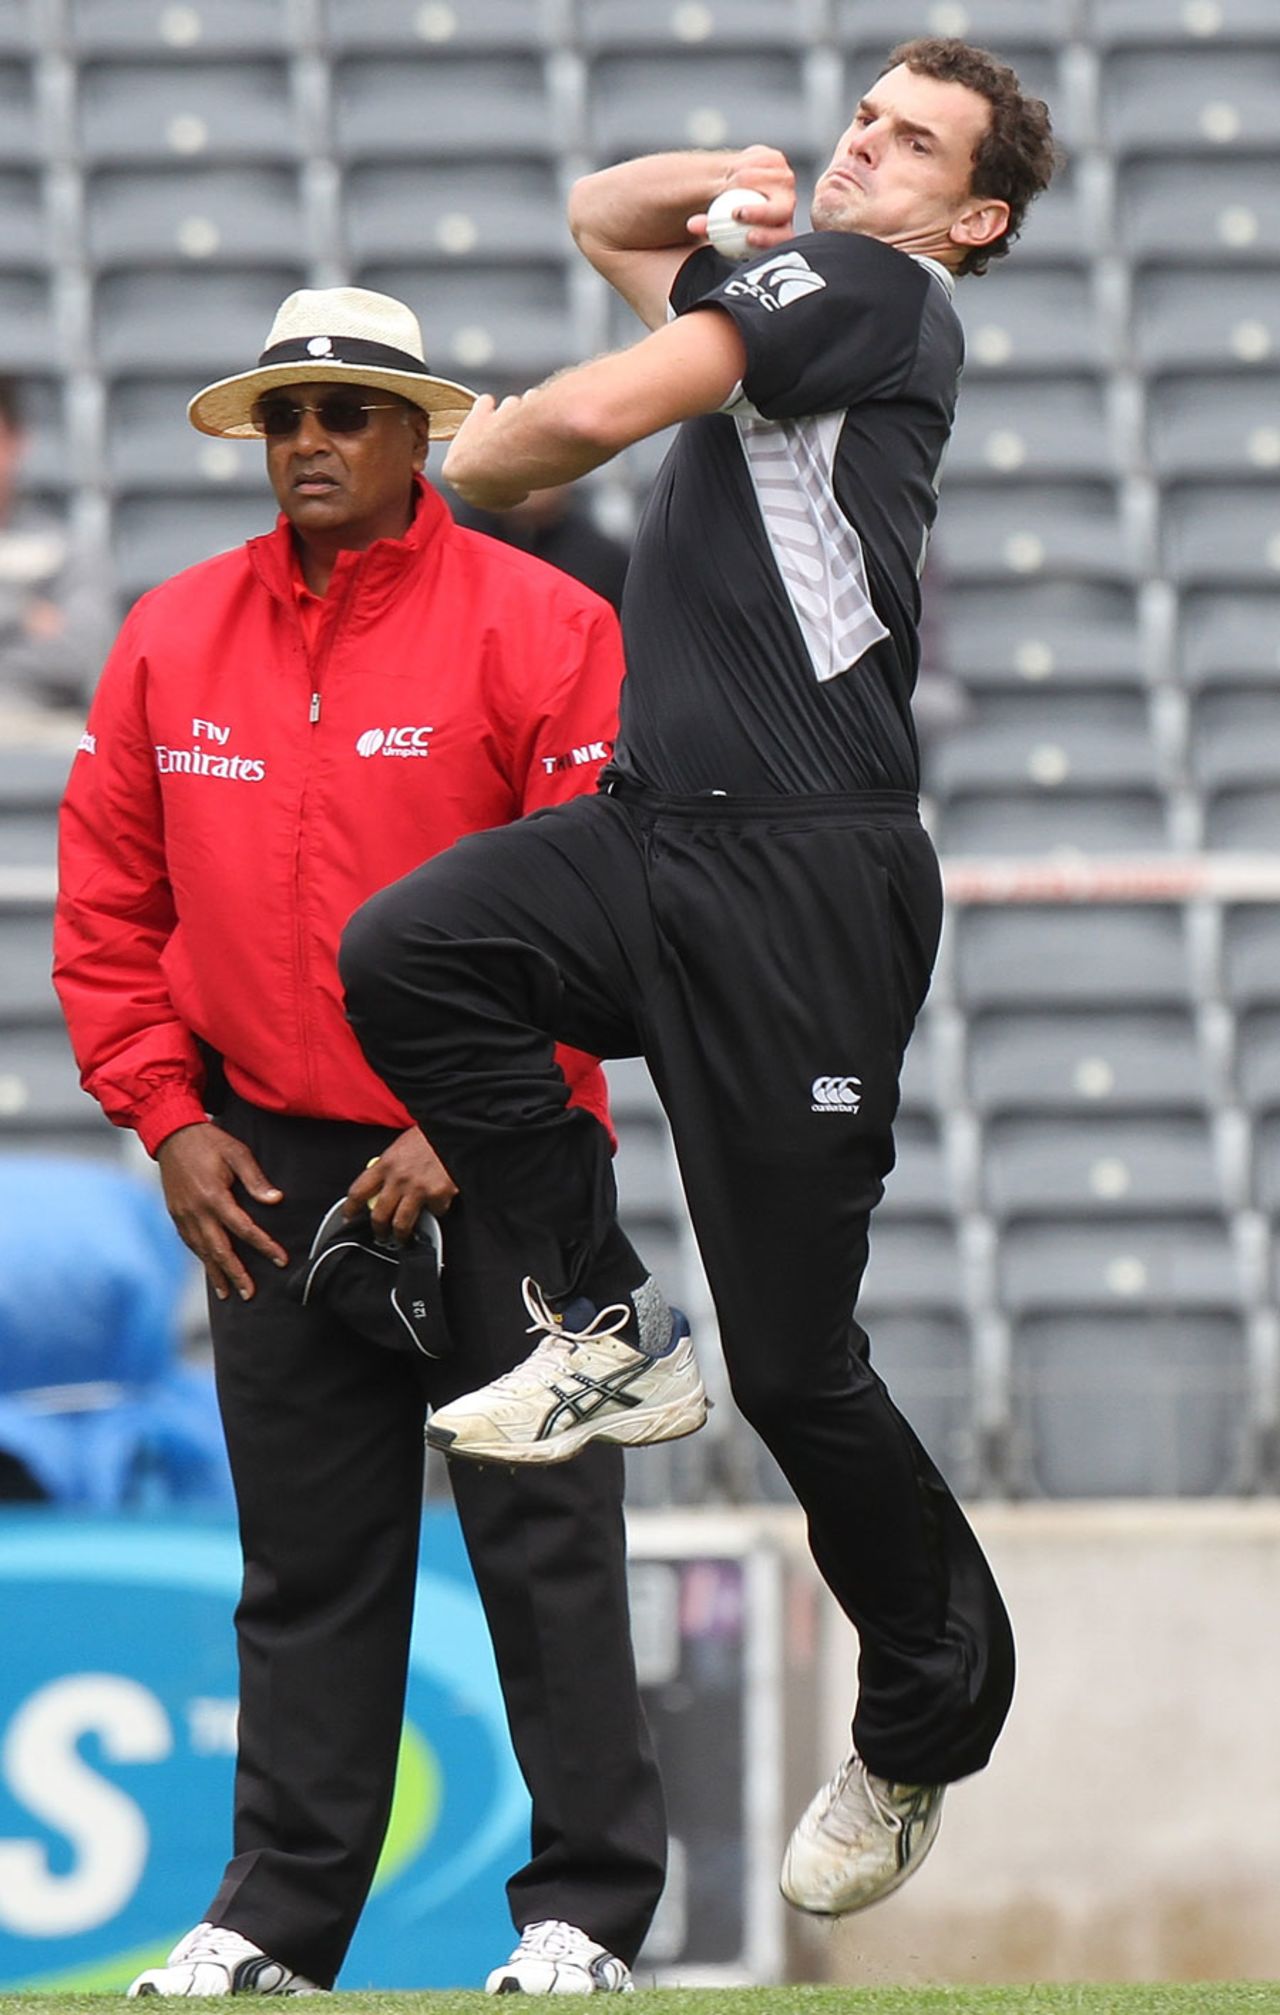 Kyle Mills leaps in his delivery stride, New Zealand v Pakistan, 3rd ODI, Christchurch, January 29, 2011